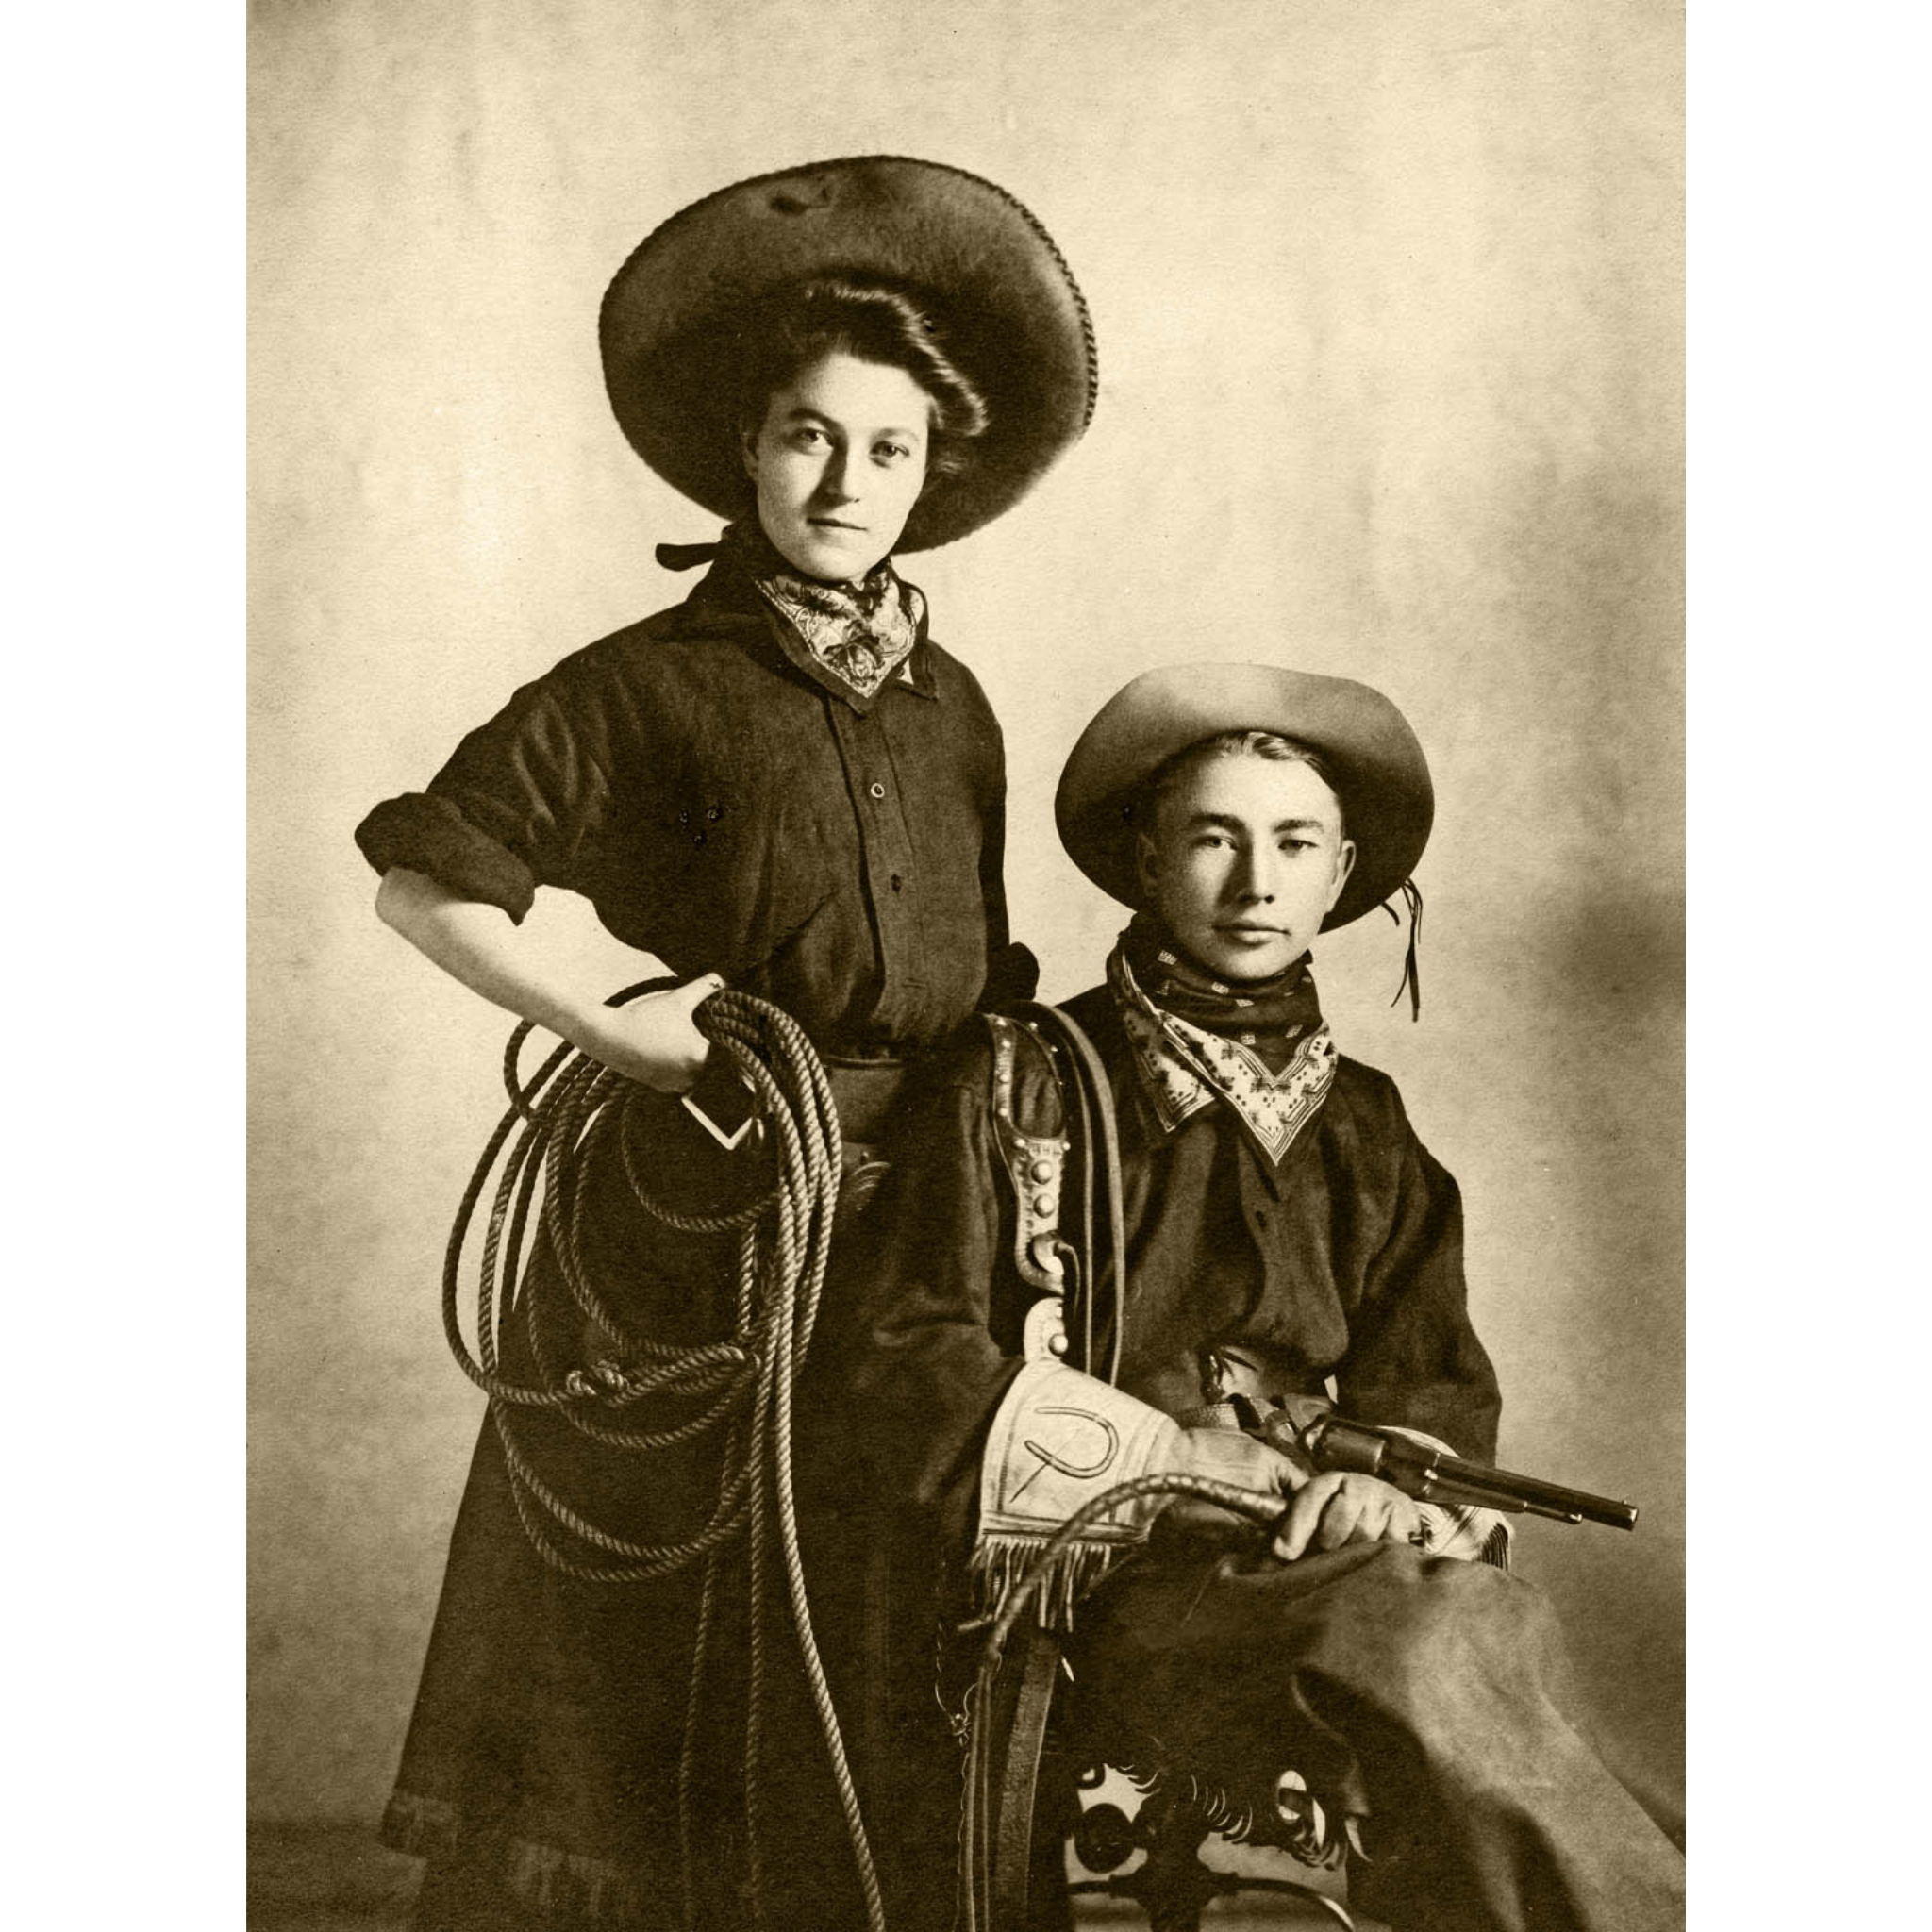 Cowgirl Holding Rope and Cowboy with Pistol - ca. 1915 Photograph